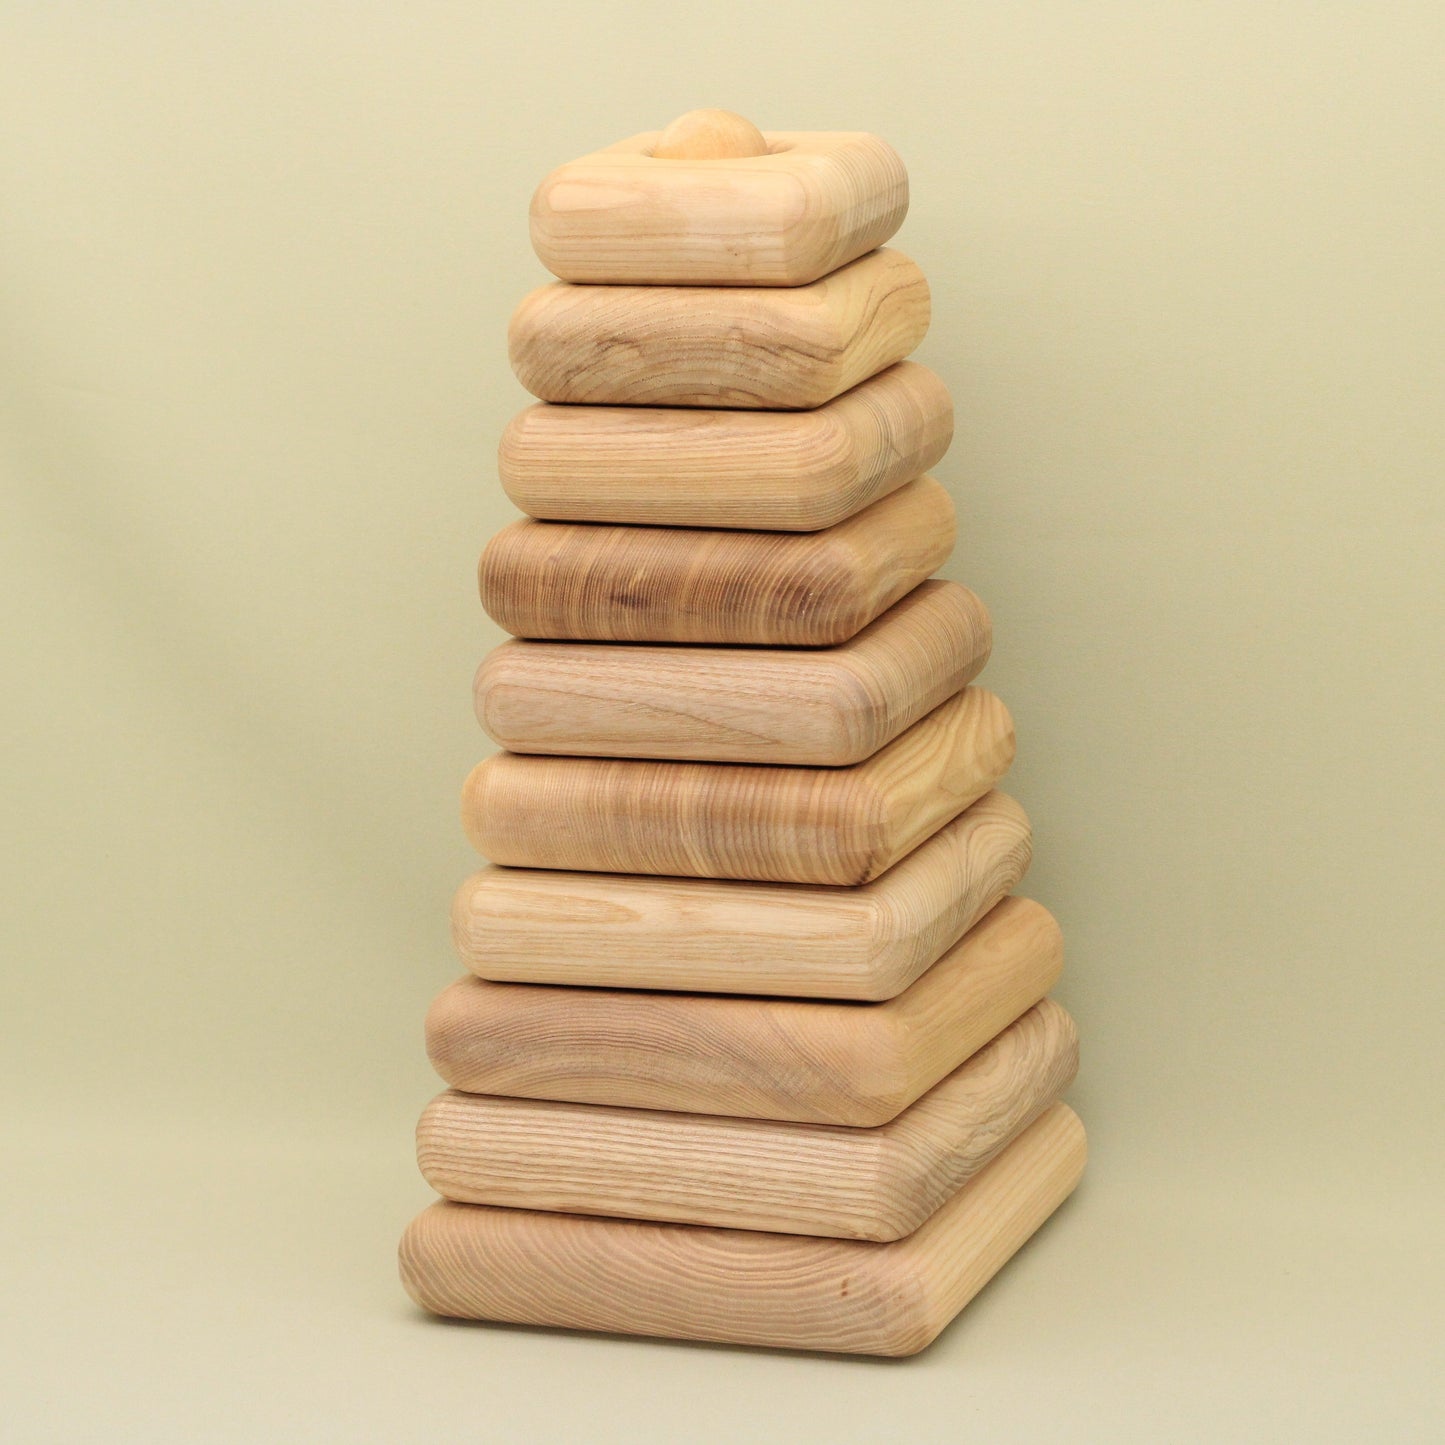 Lotes Toys Natural Giant Square Wooden Stacking Pyramid GP03